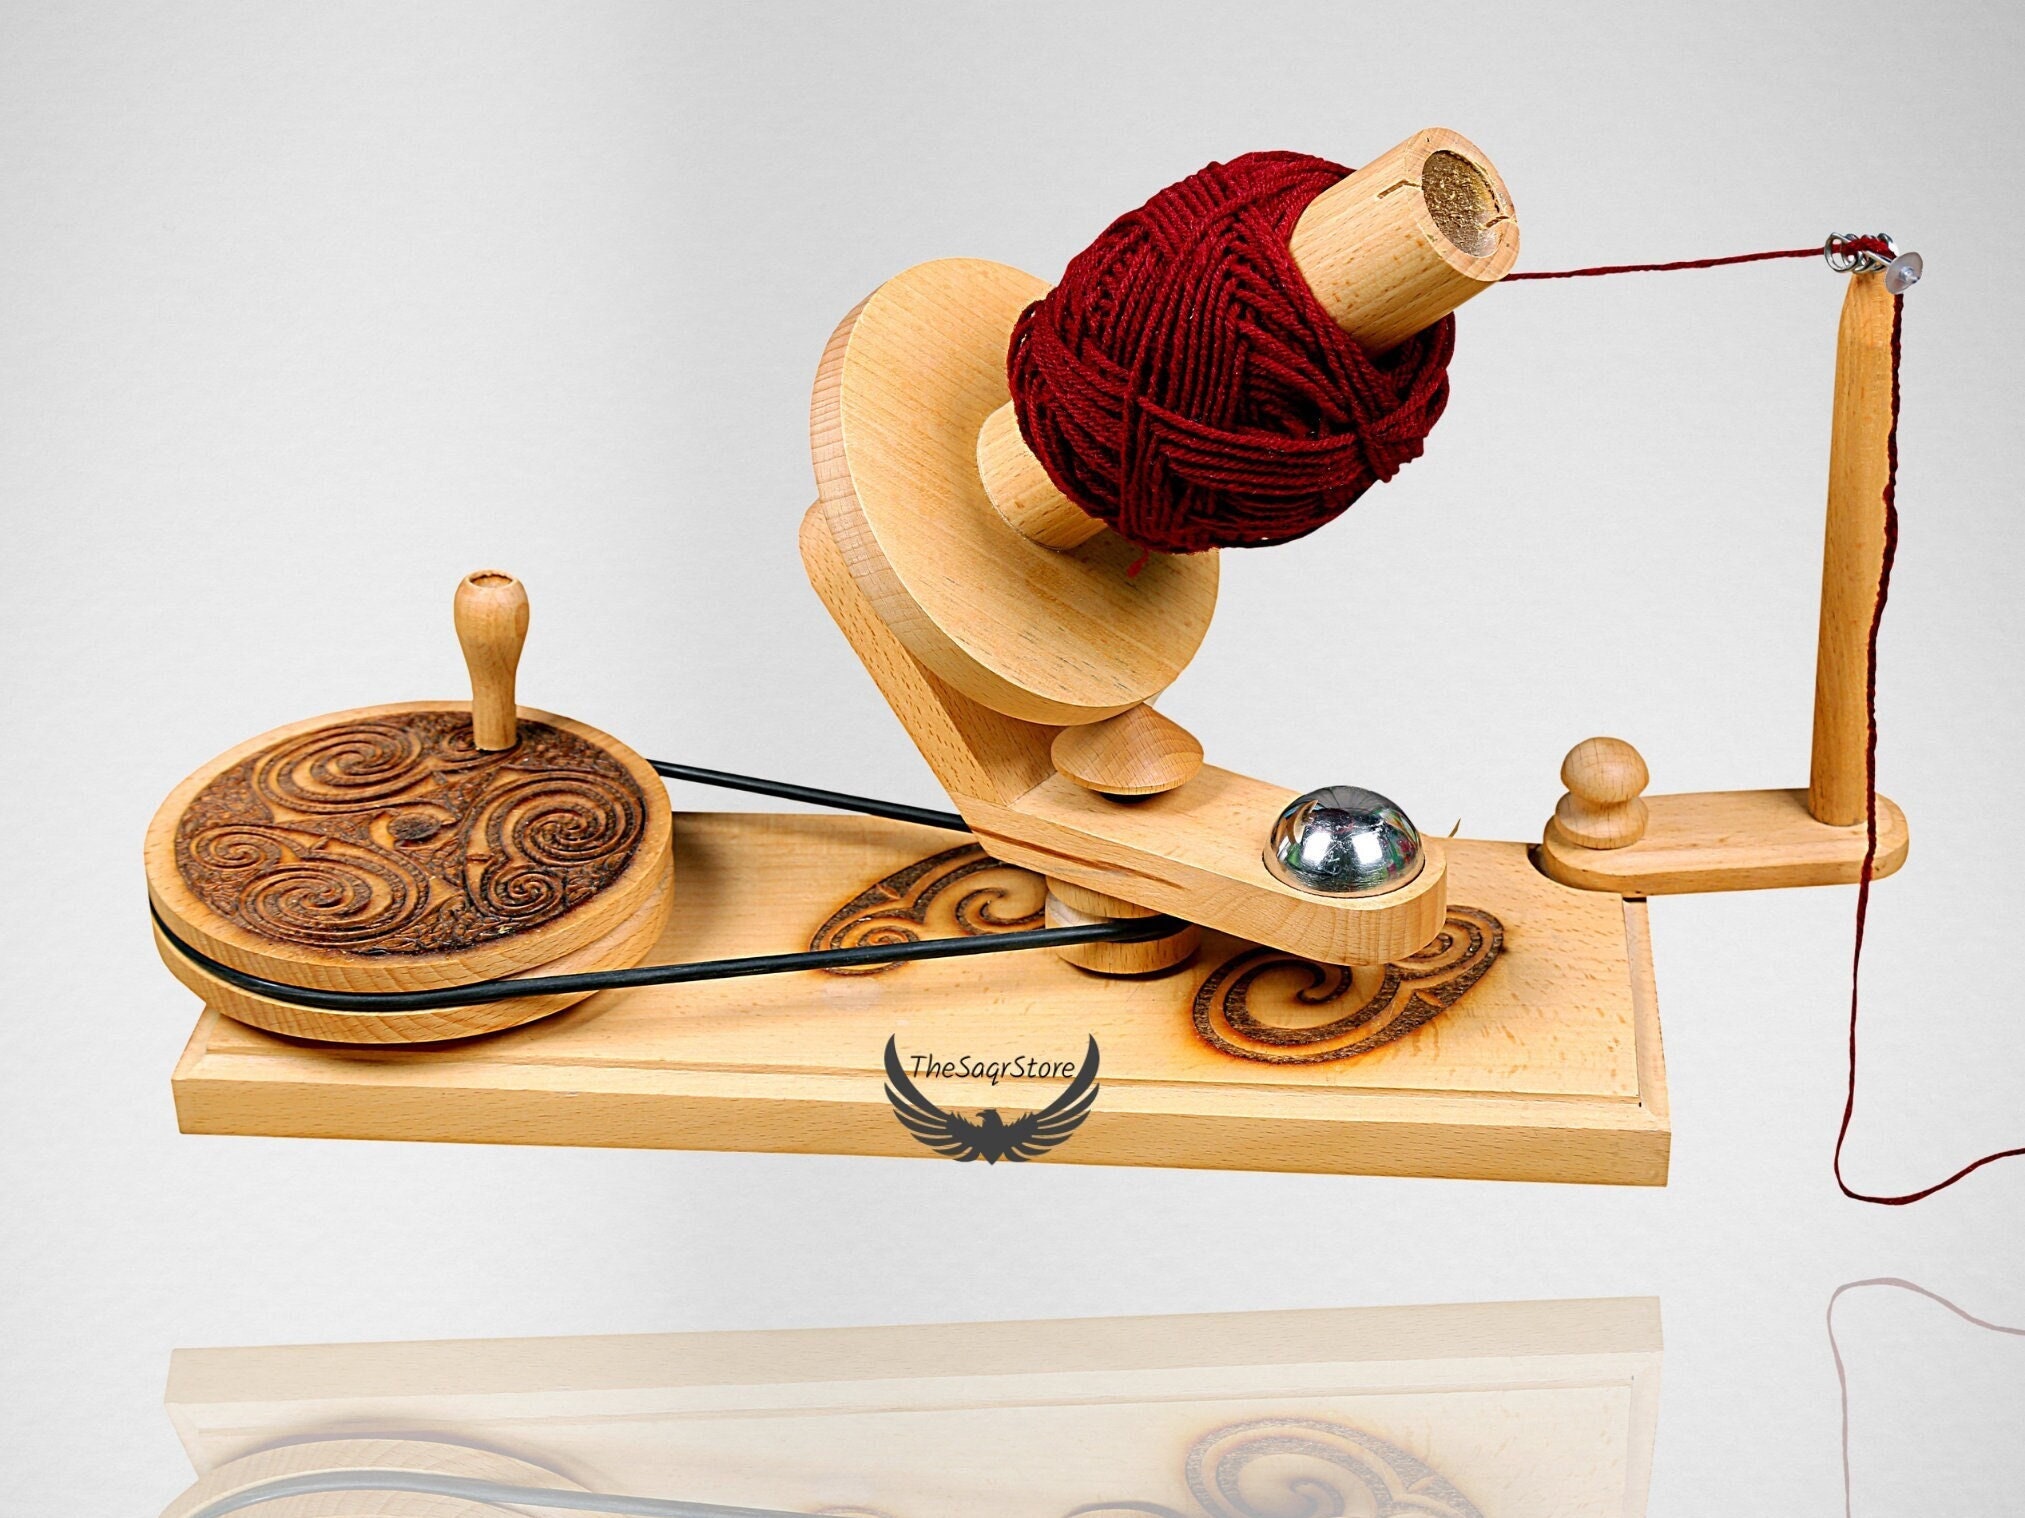 Wooden Yarn Ball Winder Handcrafted Large Yarn Winder for Knitting &  Crocheting Hand Operated Heavy Duty Natural Ball Winder 